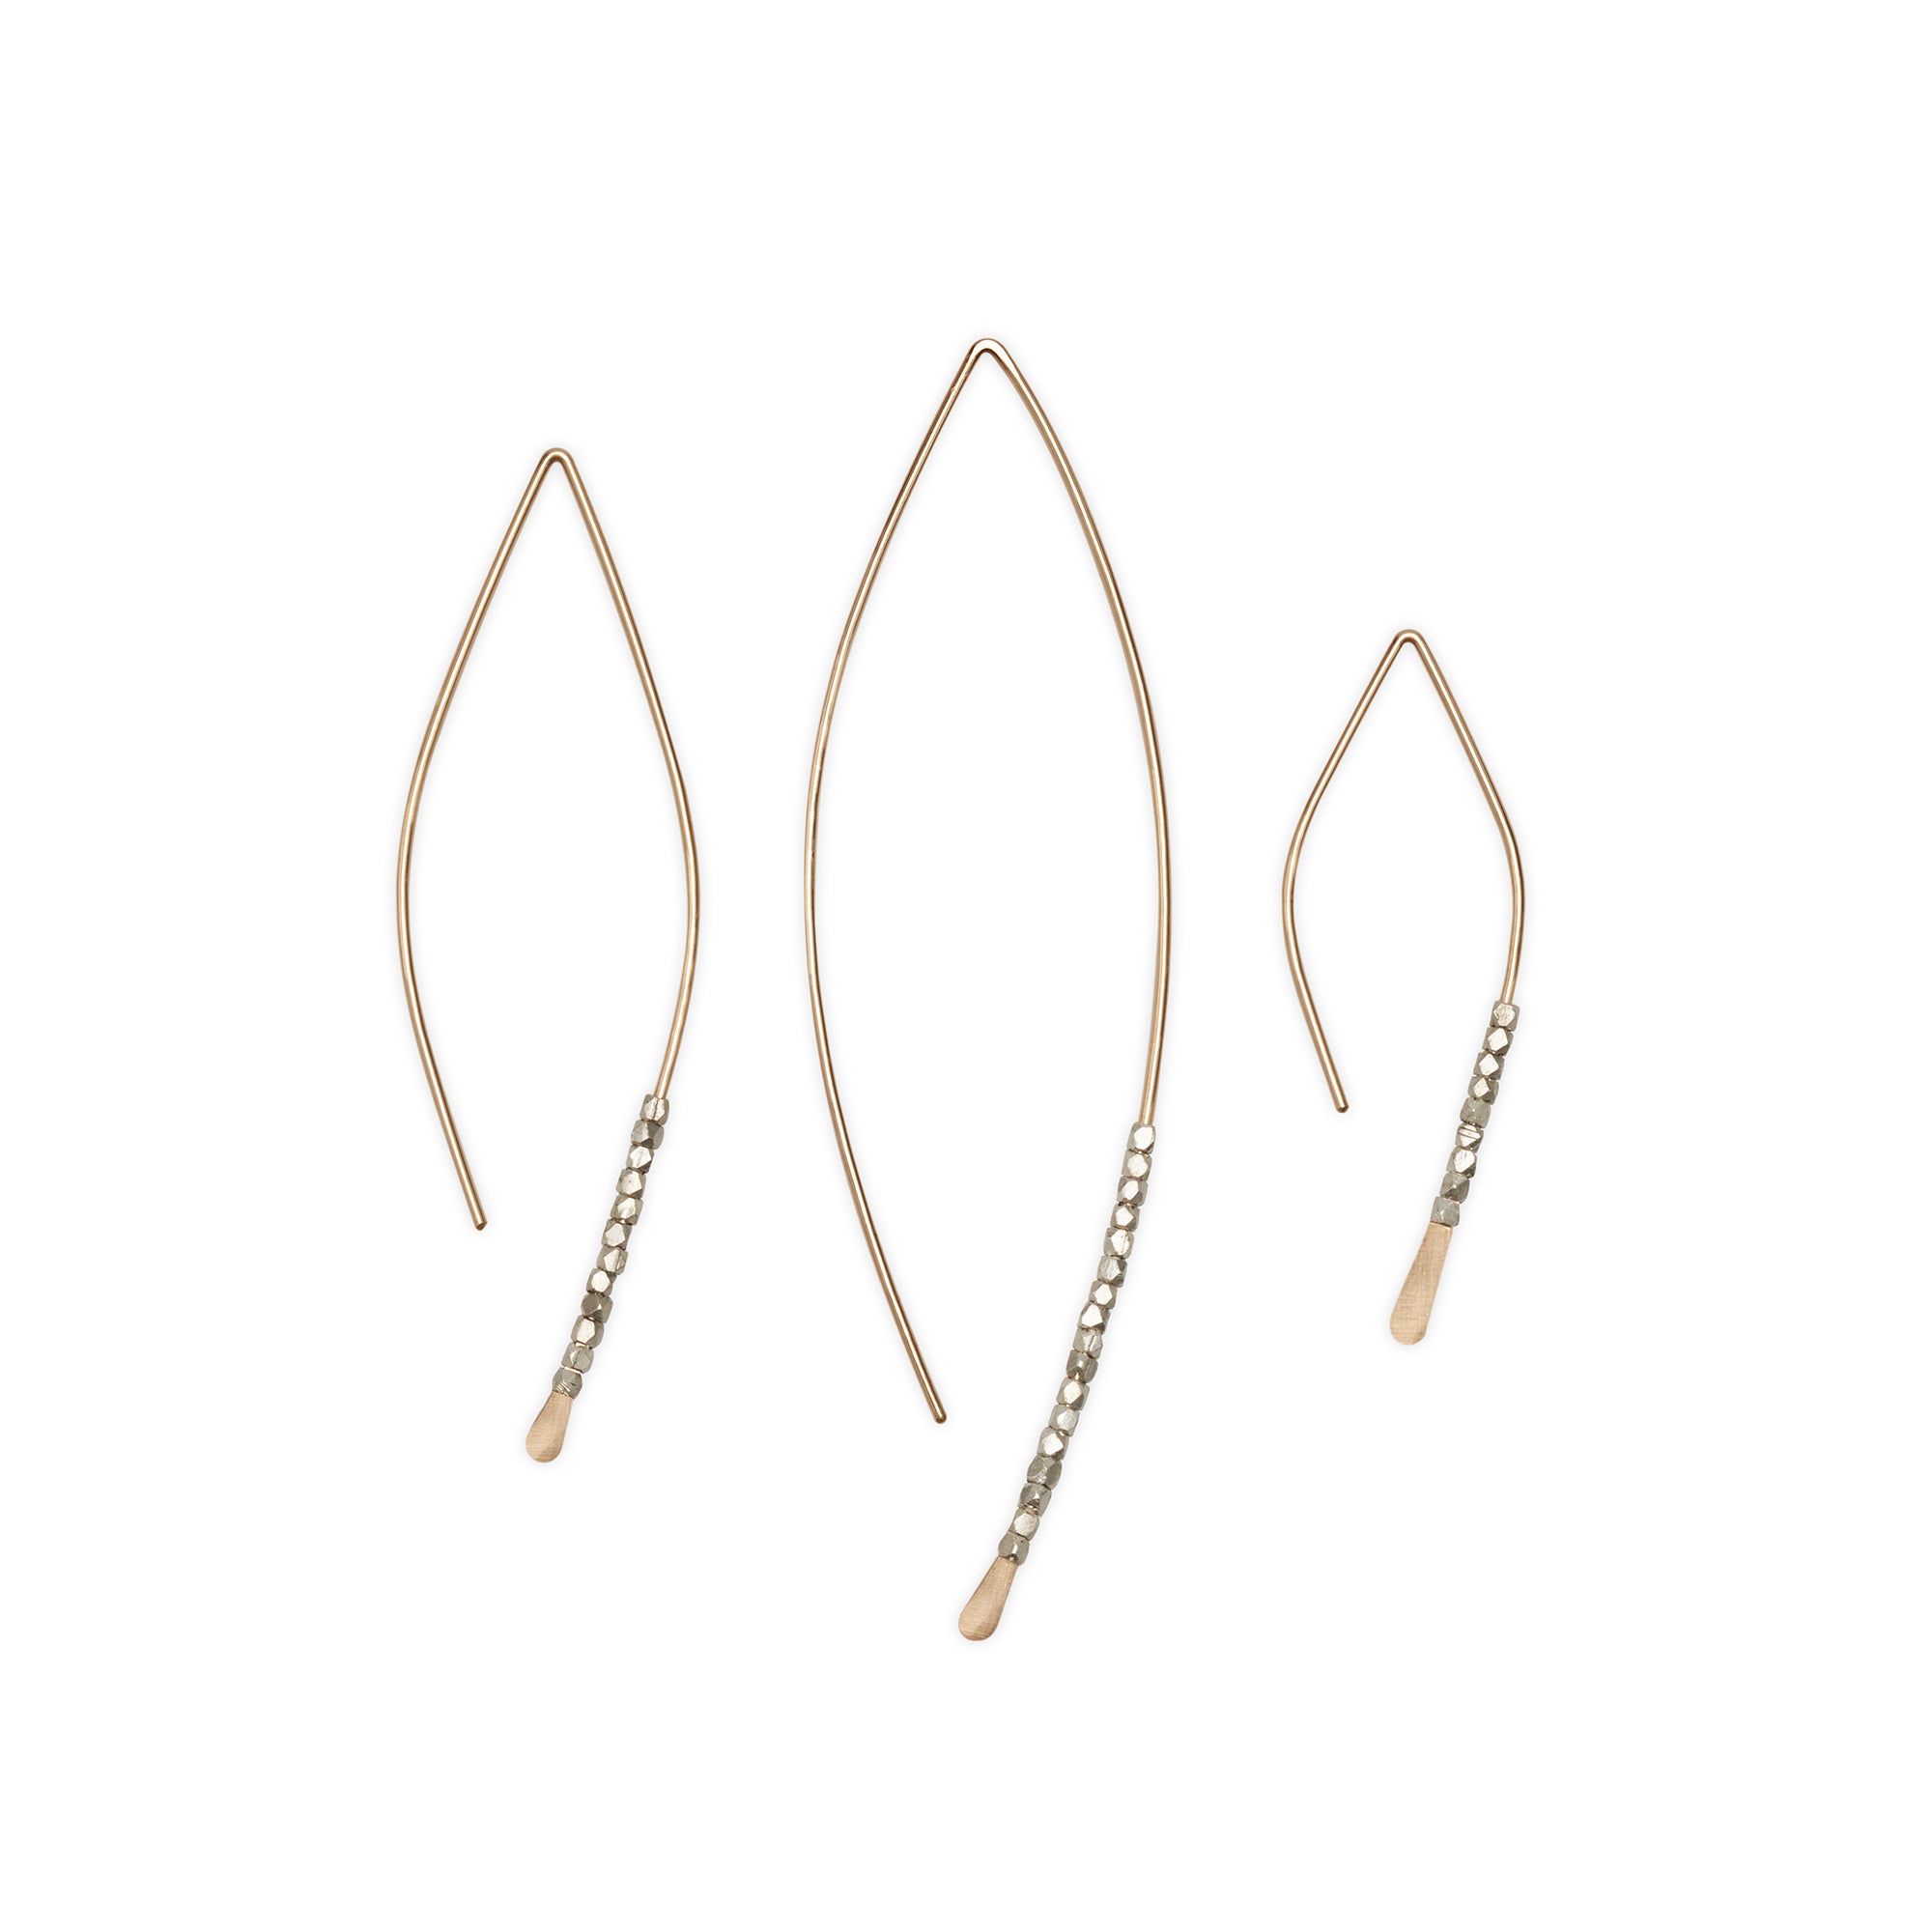 The Bead Crescent Earrings feature a thin, hammered wire adorned with sterling silver beads 